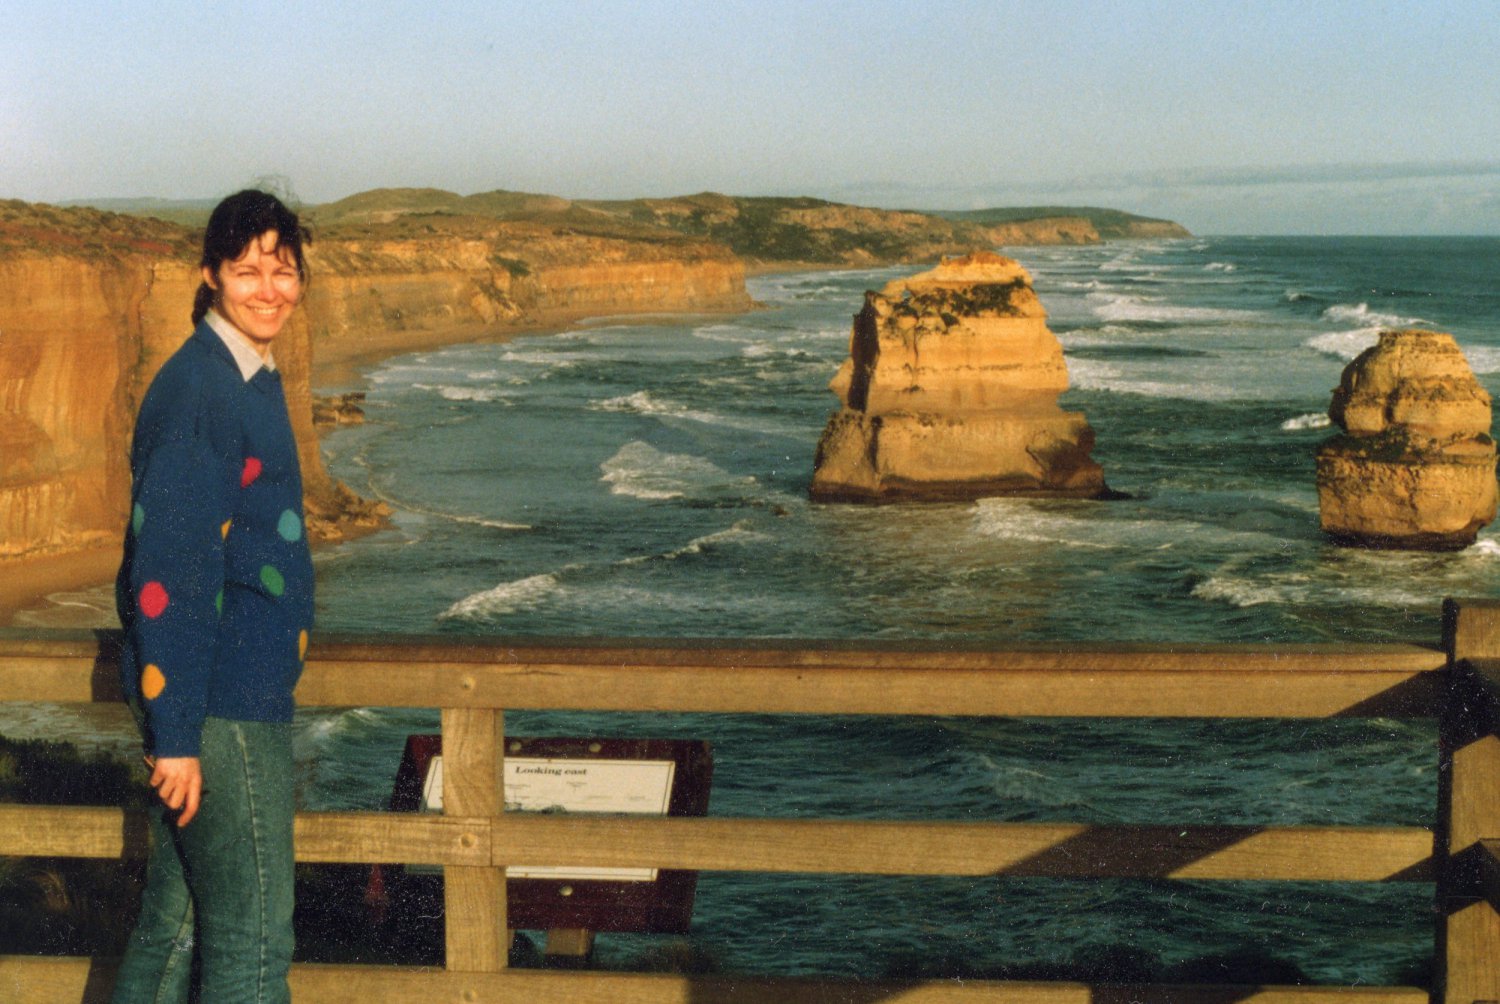 Karen at the west coast. The beautiful and wild west coast of Victoria. September 1992.